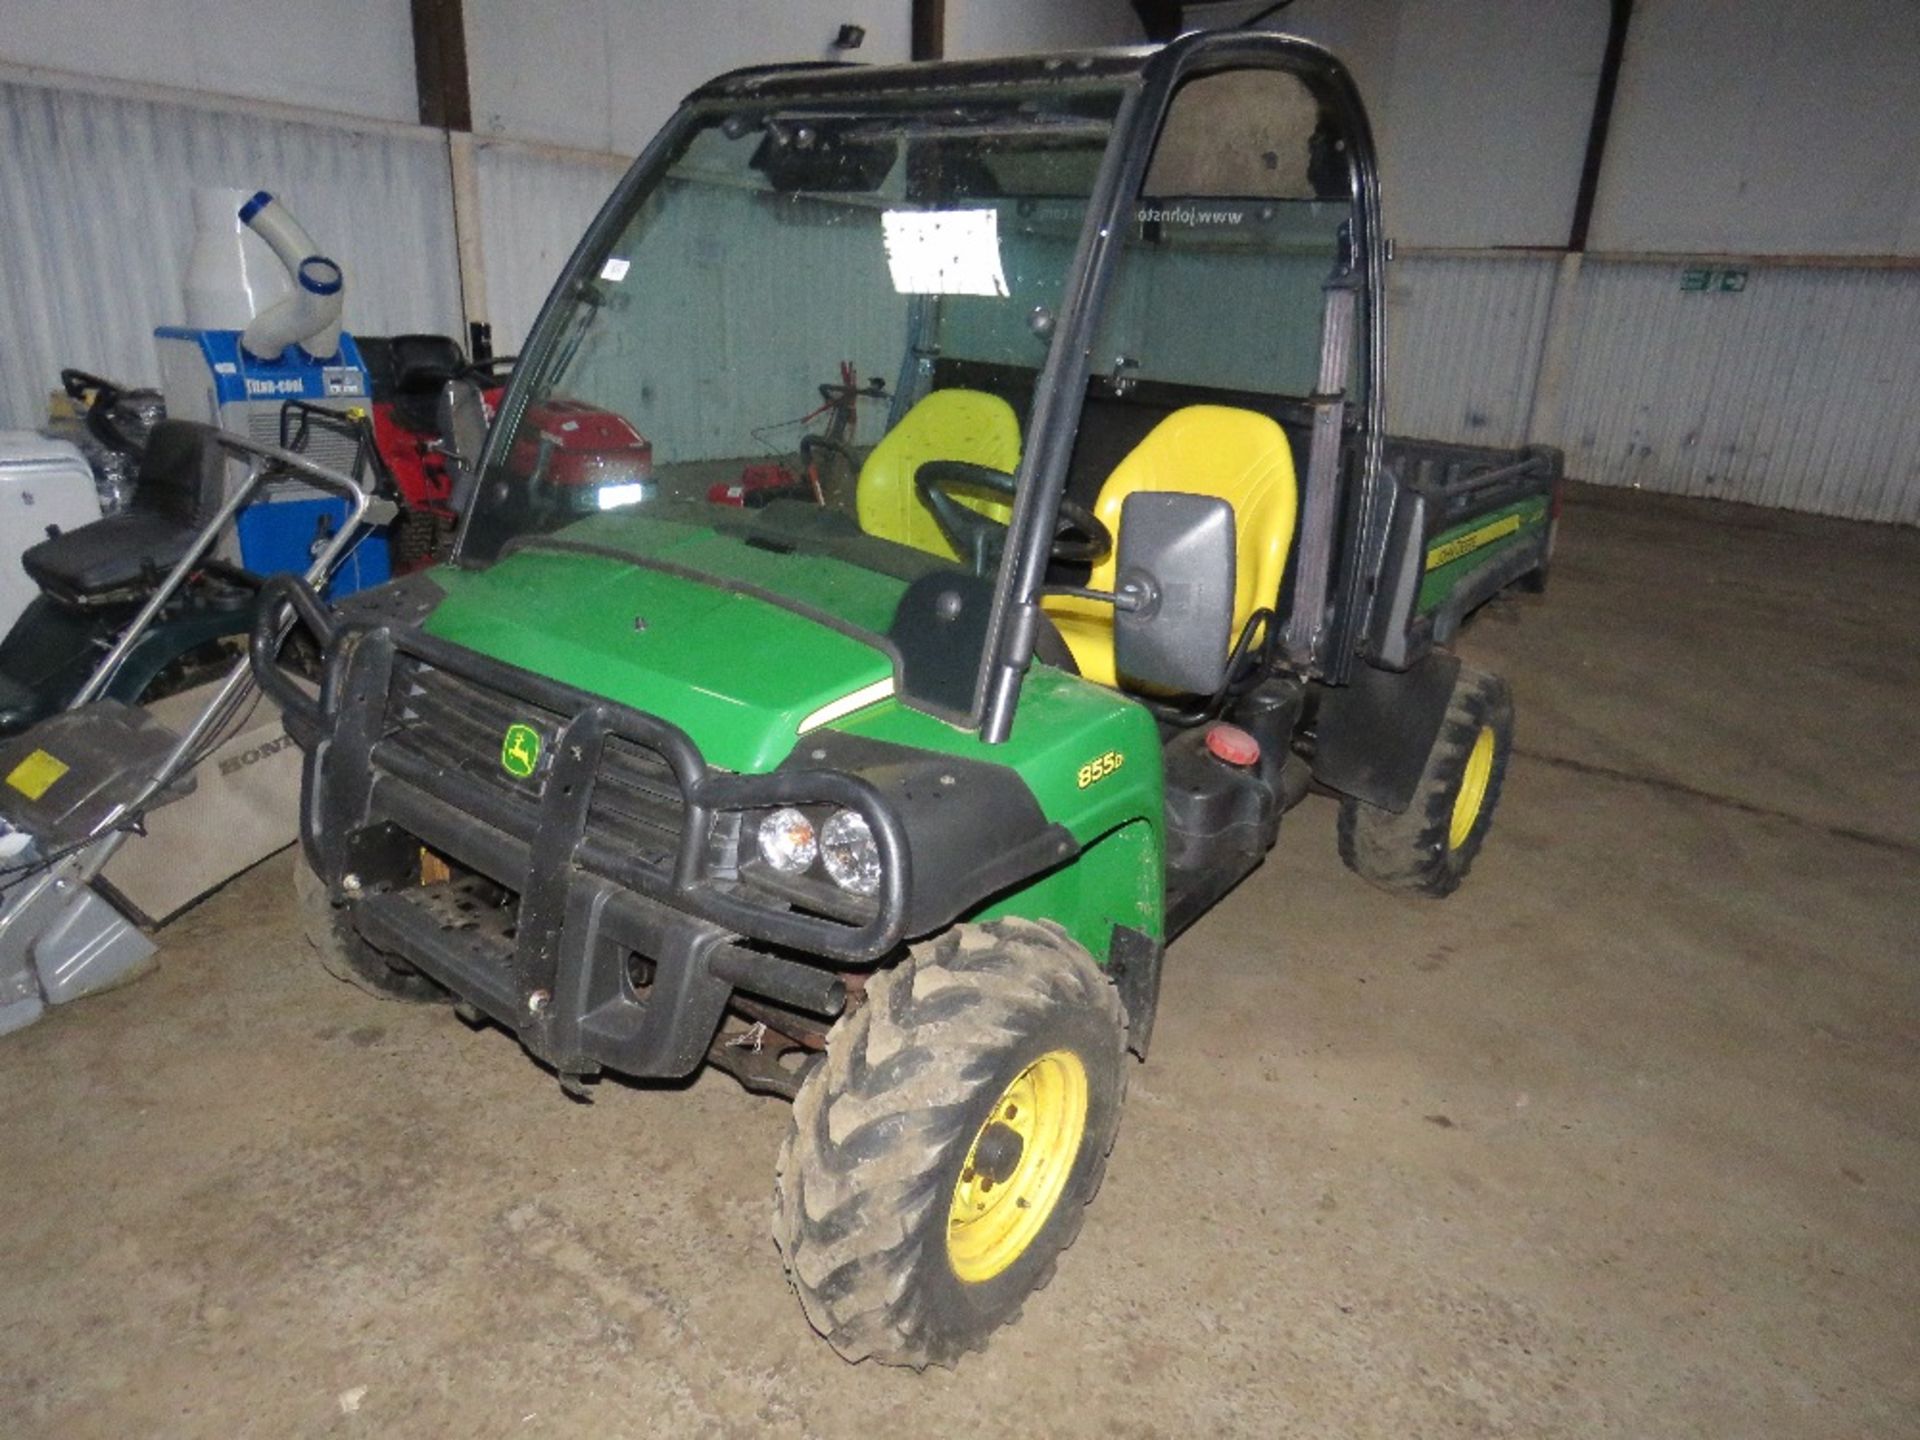 JOHN DEERE 855D GATOR YEAR 2013, REG:PY63 LZJ (LOG BOOK TO APPLY FOR) 1642 HOURS SHOWING. WHEN